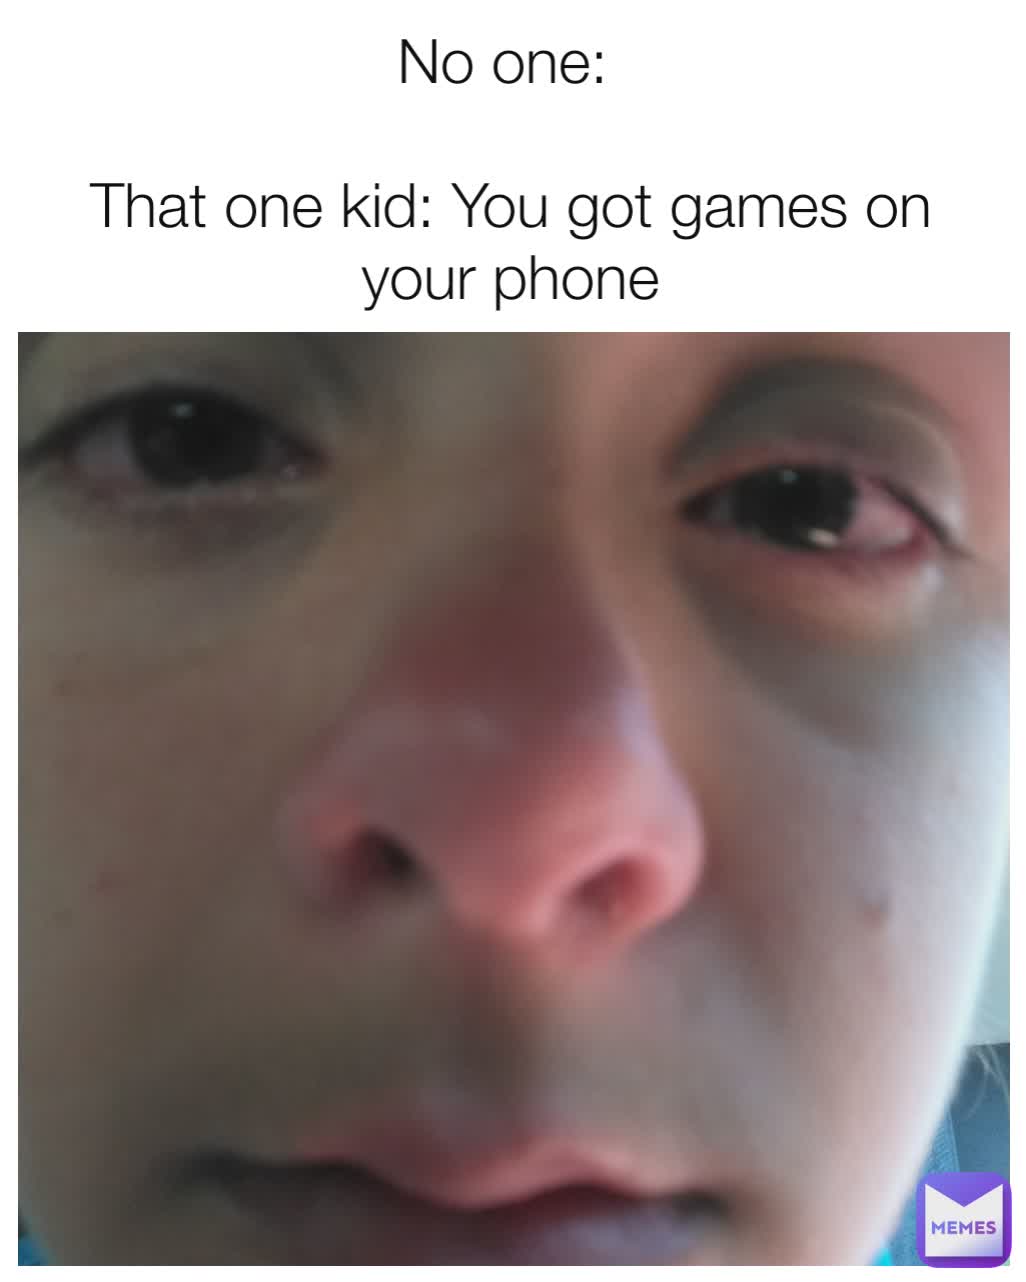 No one: 

That one kid: You got games on your phone